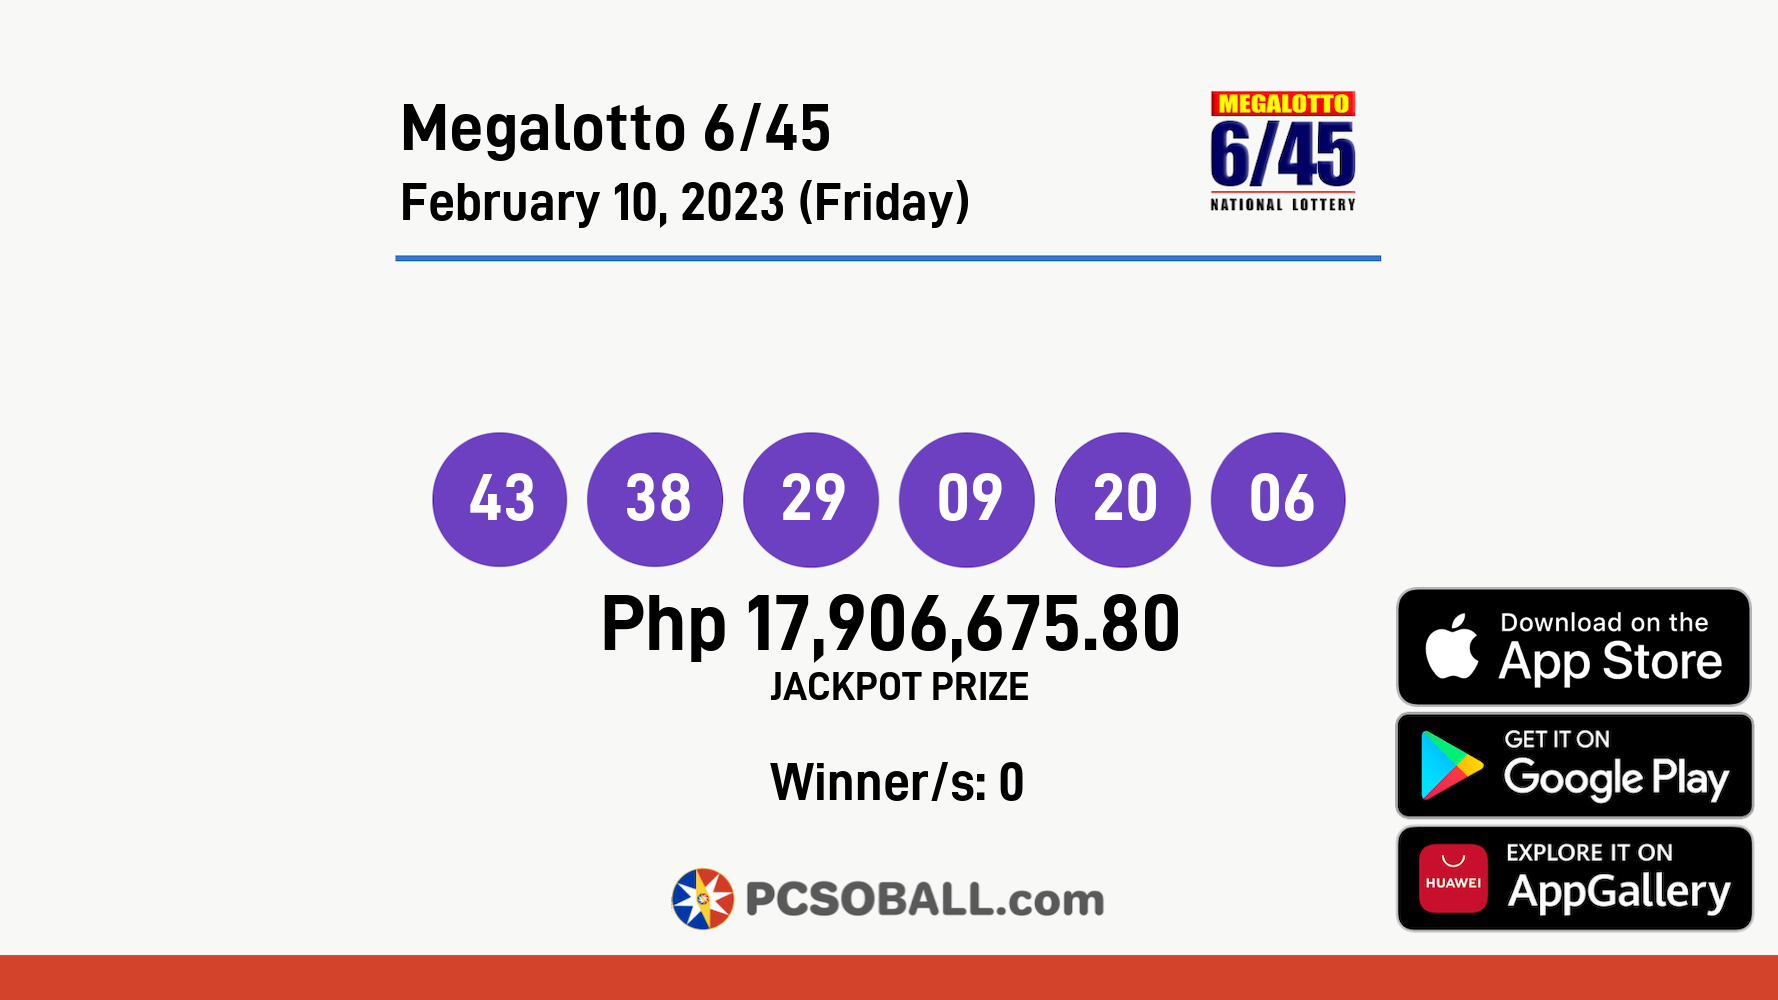 Megalotto 6/45 February 10, 2023 (Friday) Result